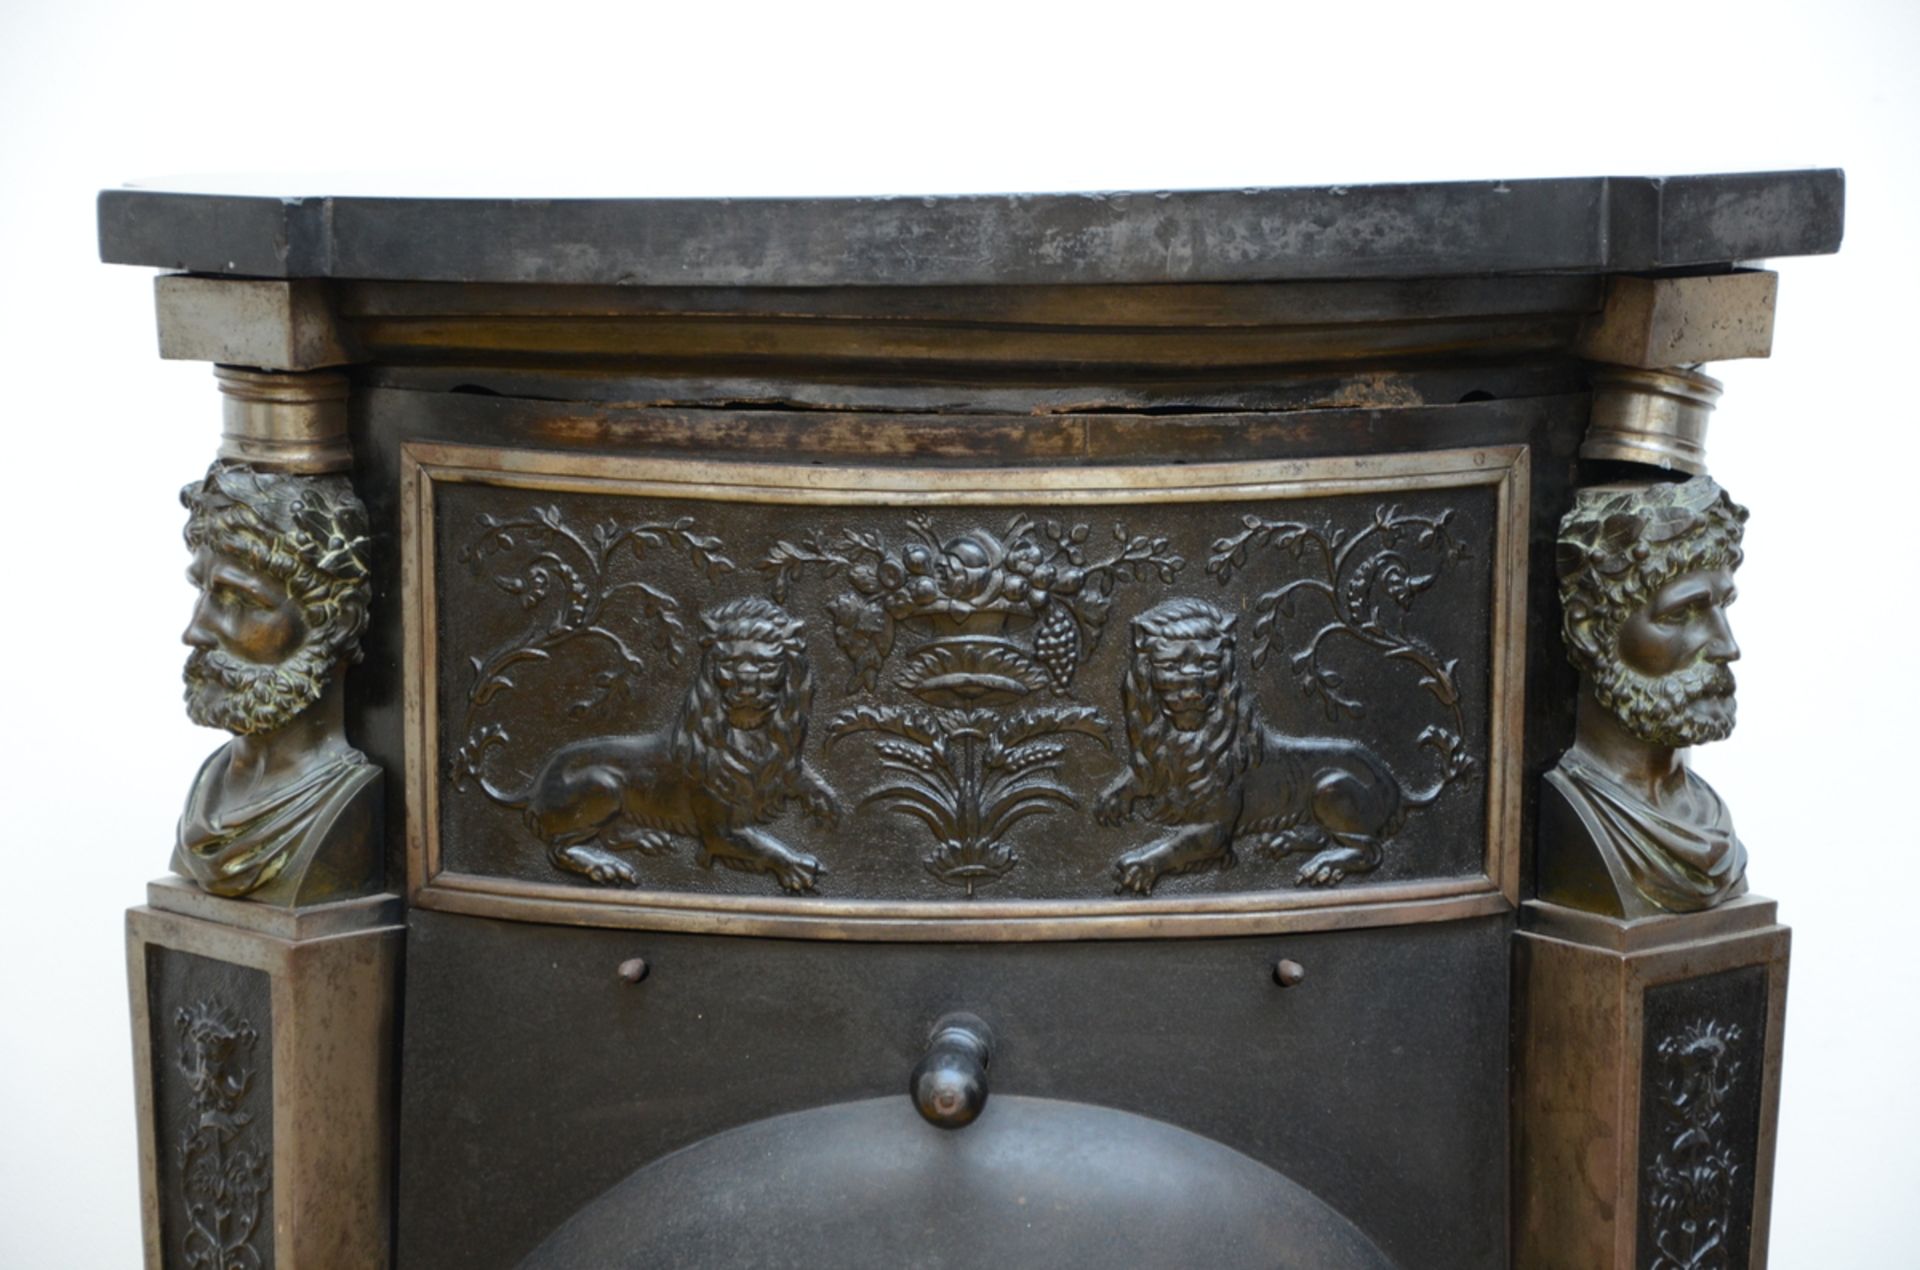 Empire stove in fonte with bronze figures and a marble top (100x52cm) - Image 2 of 3